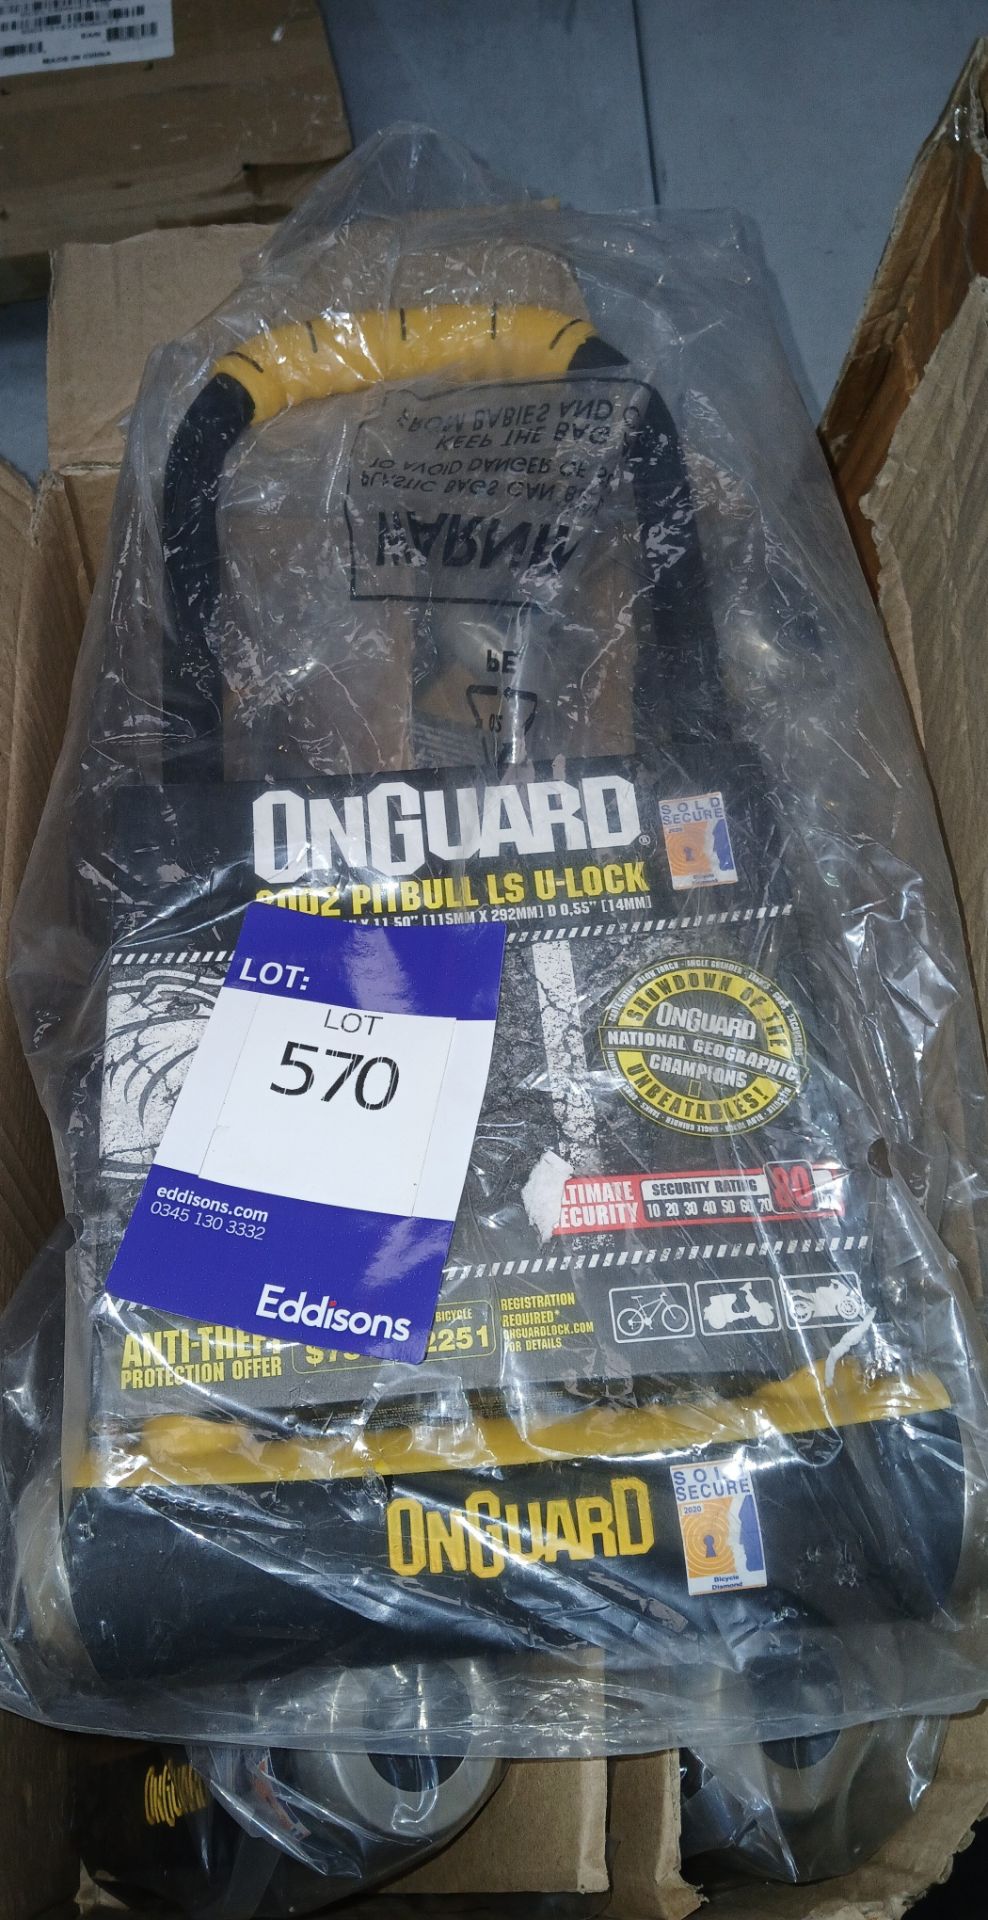 4 x Onguard 8002 Pitbull U-Lock (Please note, Viewing Strongly Recommended - Eddisons have not